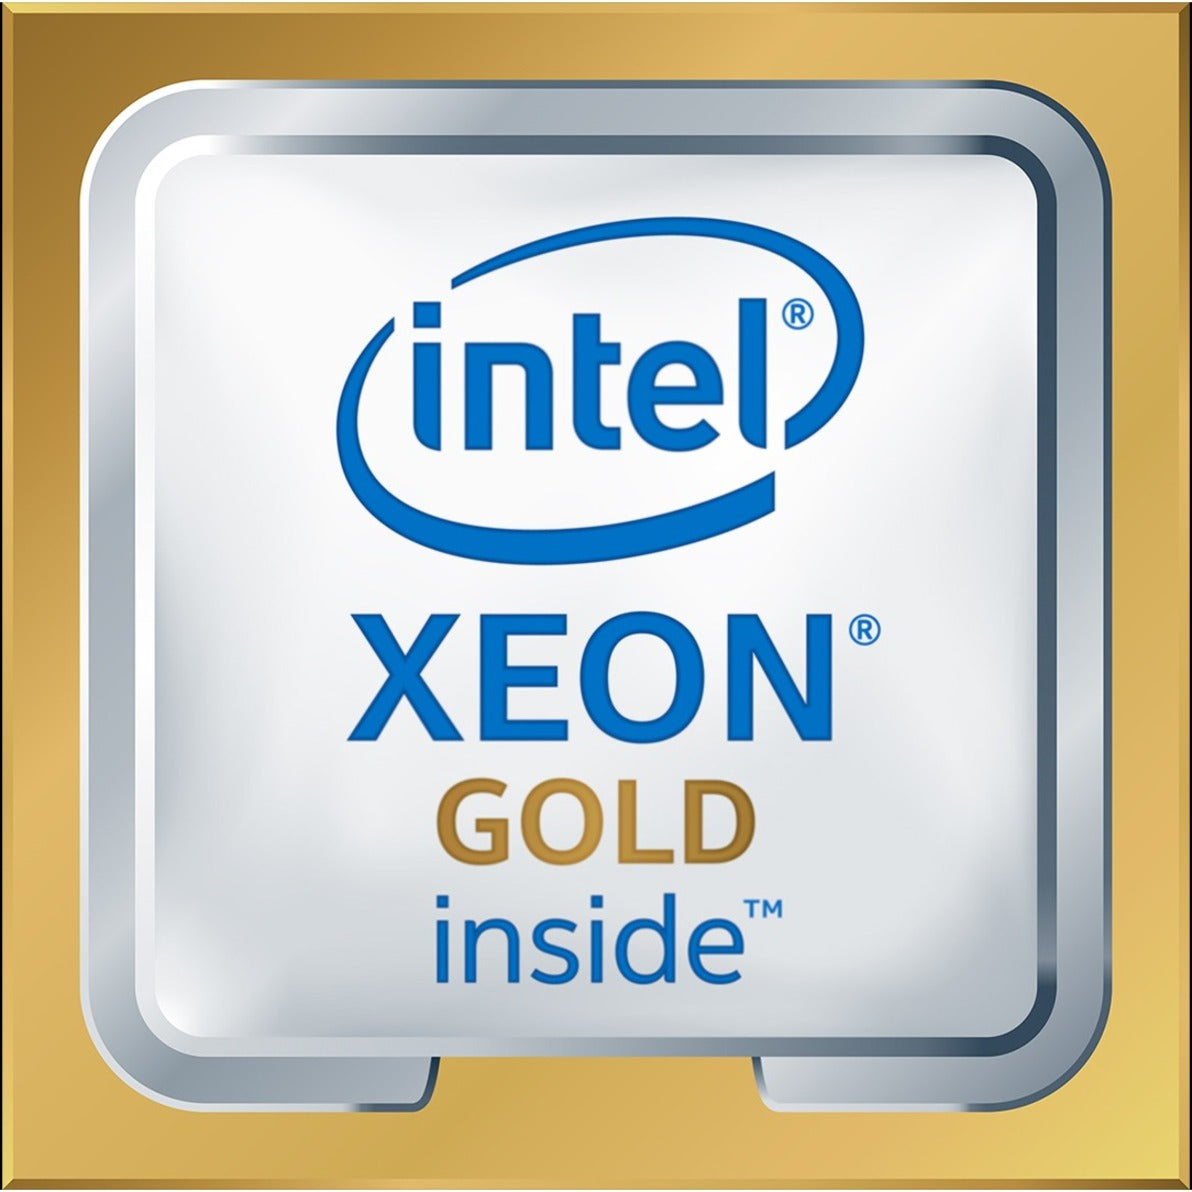 HPE P02509-B21 Xeon Gold 6240 Octadeca-core 2.60 GHz Server Processor Upgrade, 25MB L3 Cache, 64-bit Processing